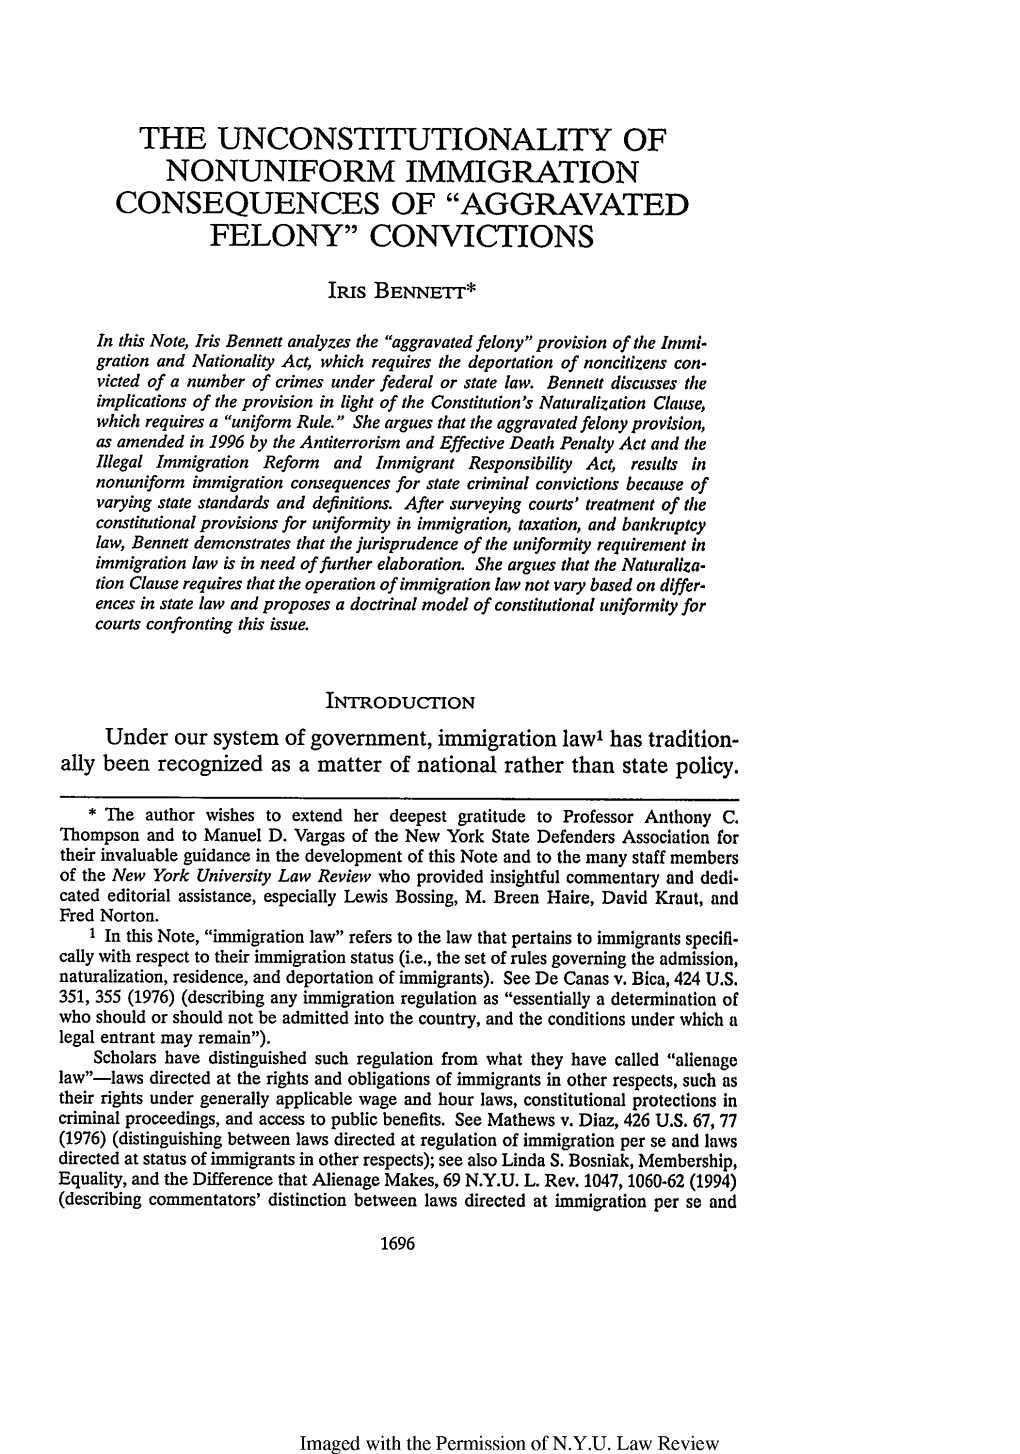 Unconstitutionality of Nonuniform Immigration Consequences of "Aggravated Felony" Convictions